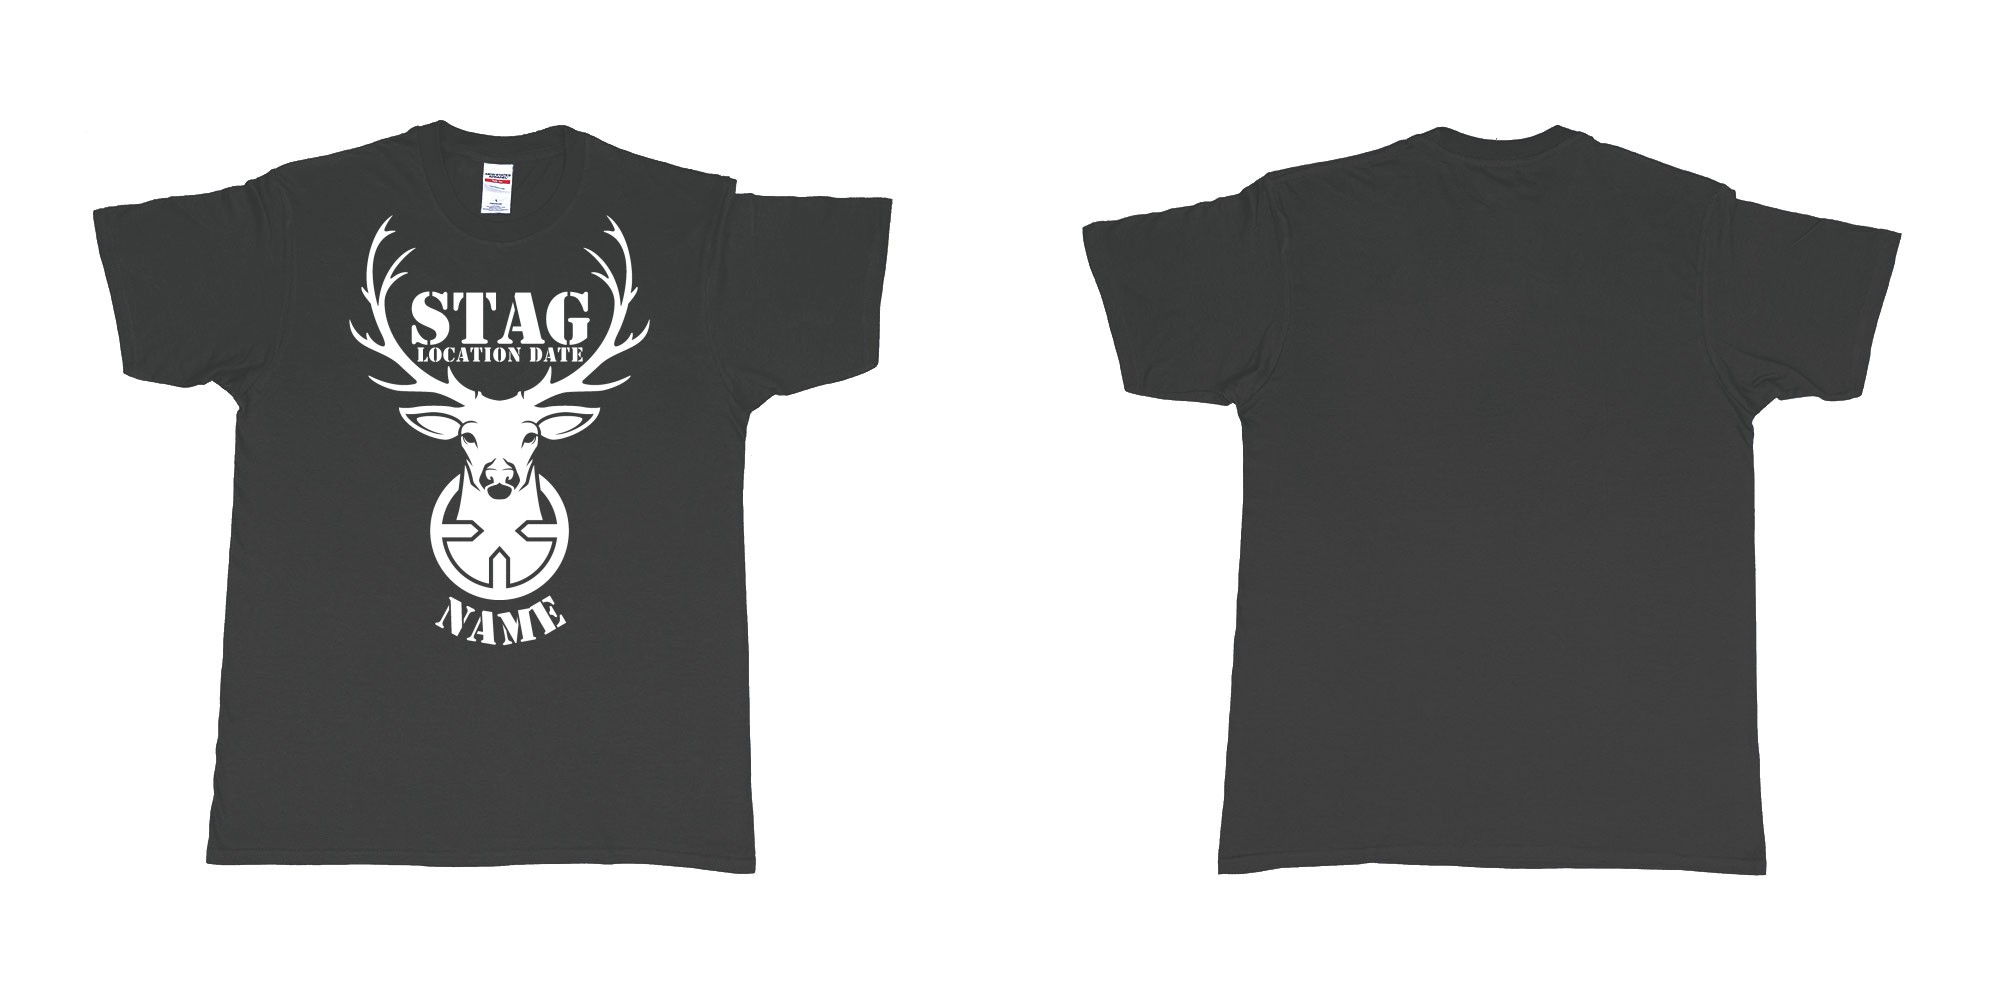 Custom tshirt design aiming for a stag custom tshirt print in fabric color black choice your own text made in Bali by The Pirate Way